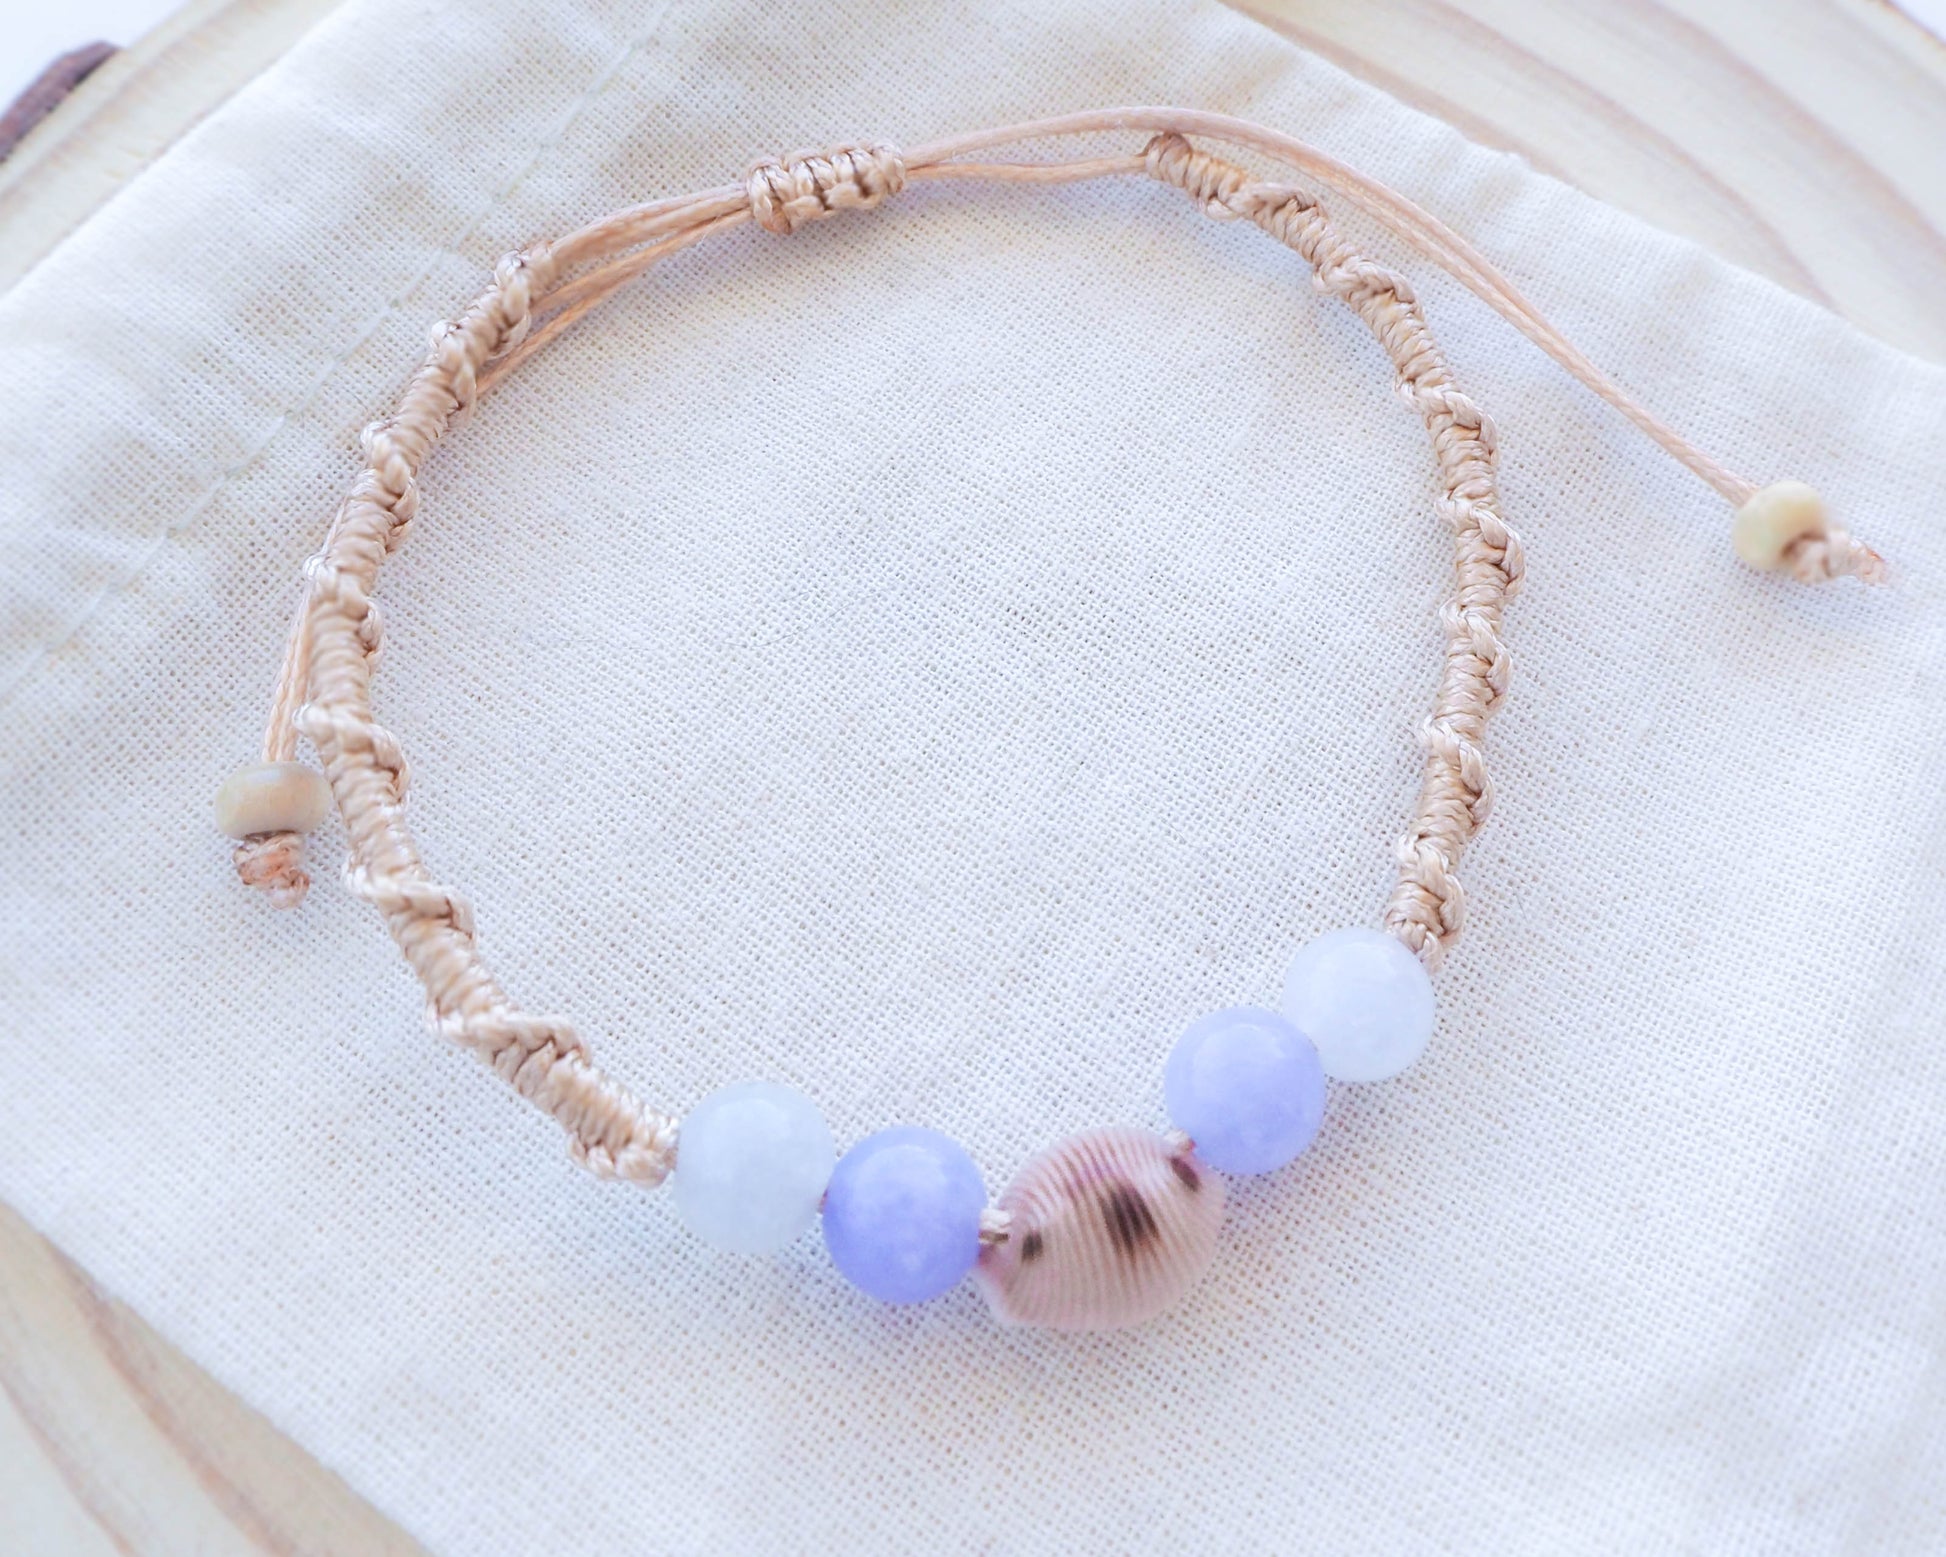 Angelite and Quartz Gemstone Beads Close-up with Cowrie shell bracelet from portugal 